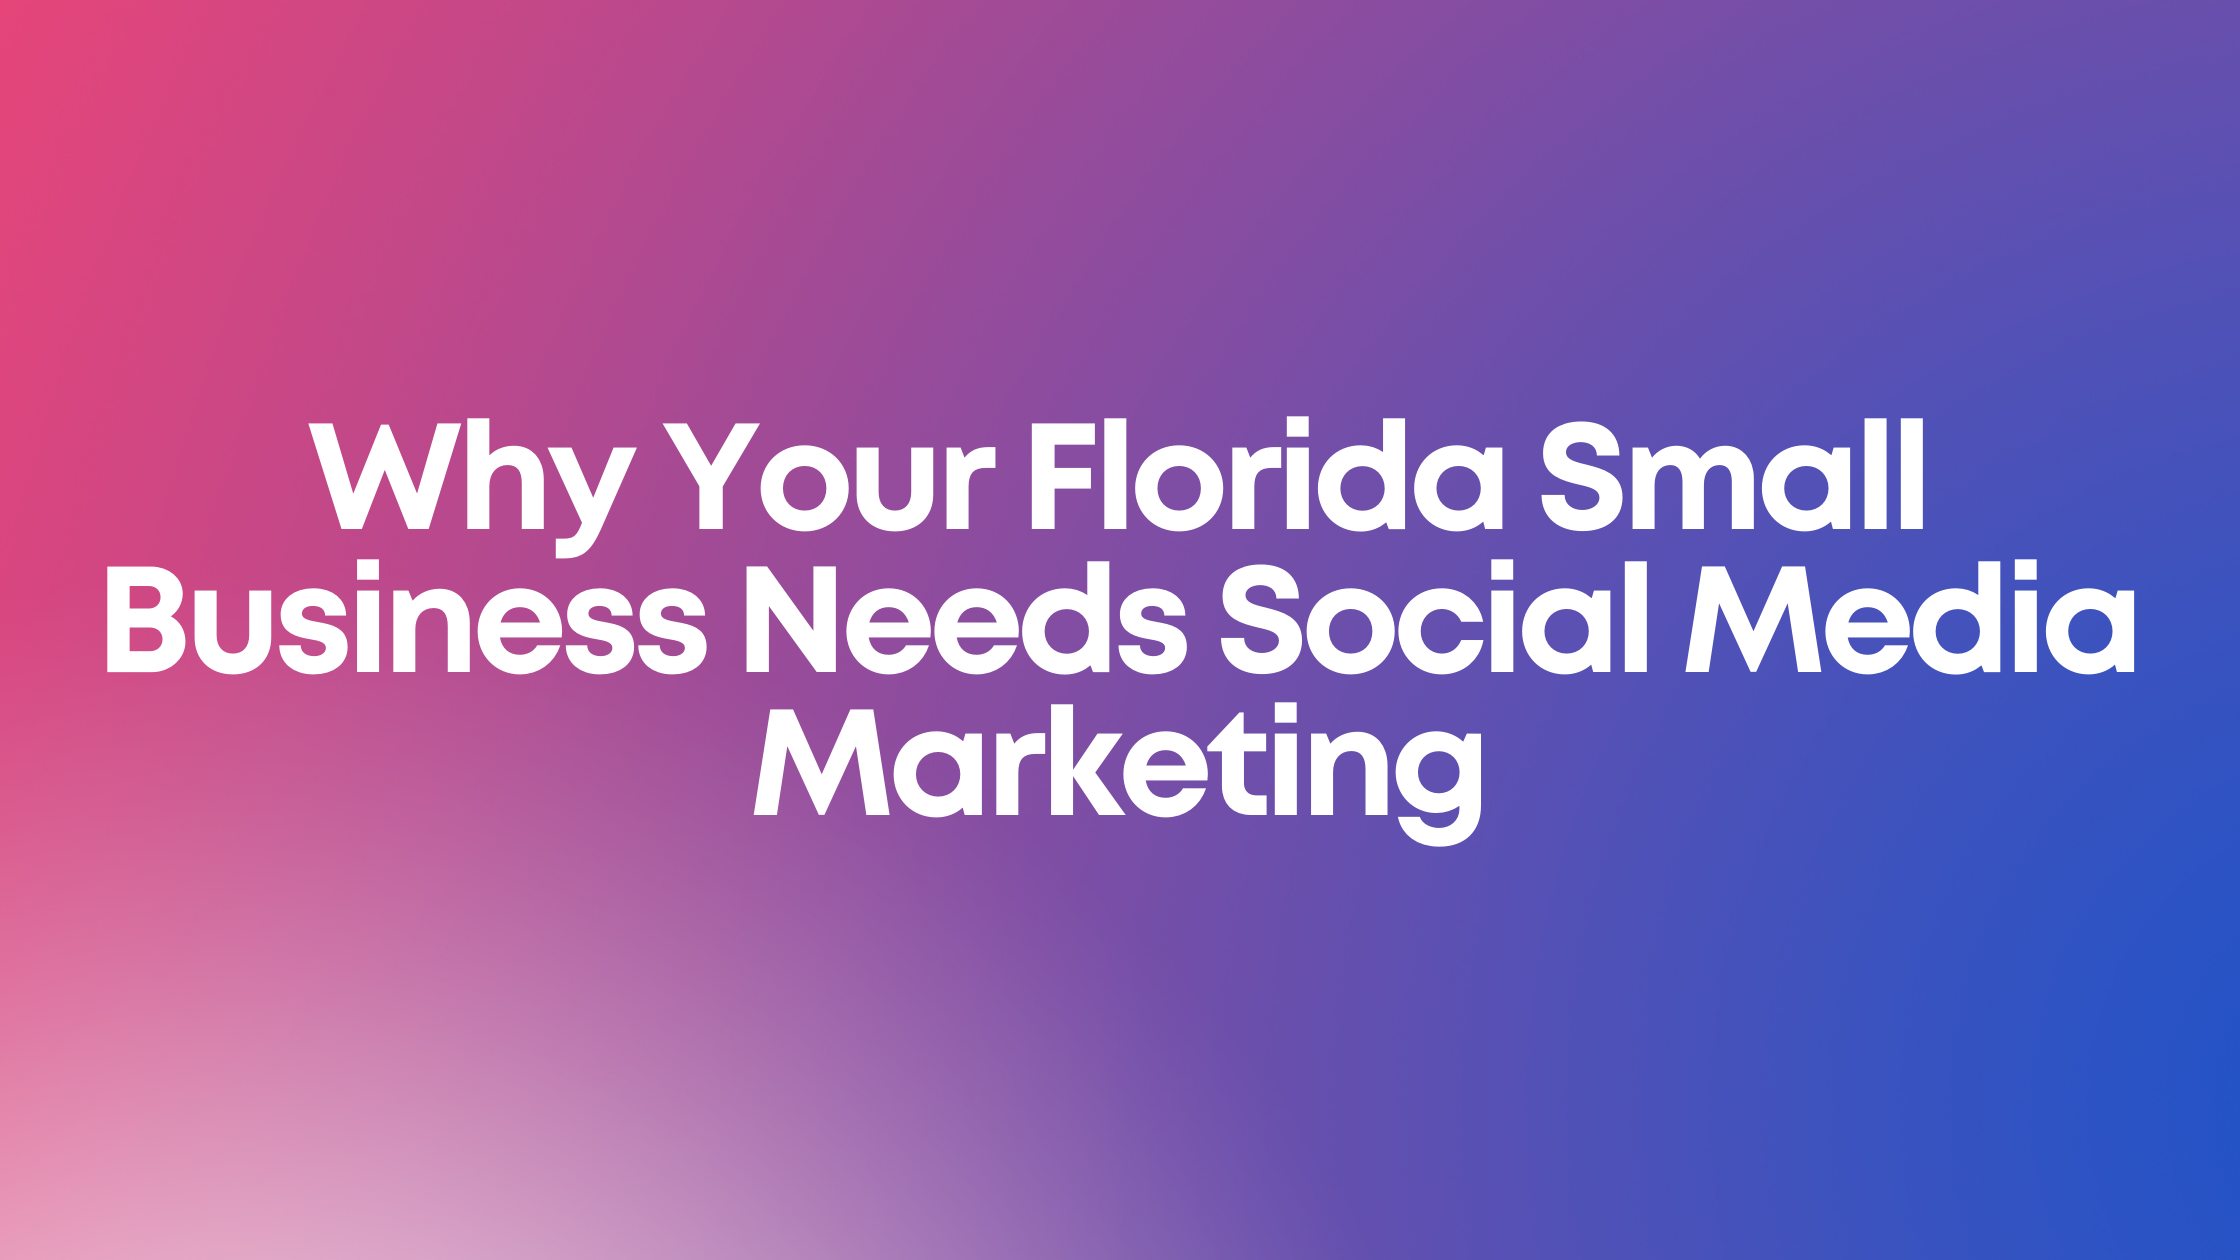 Why Your Florida Small Business Needs Social Media Marketing